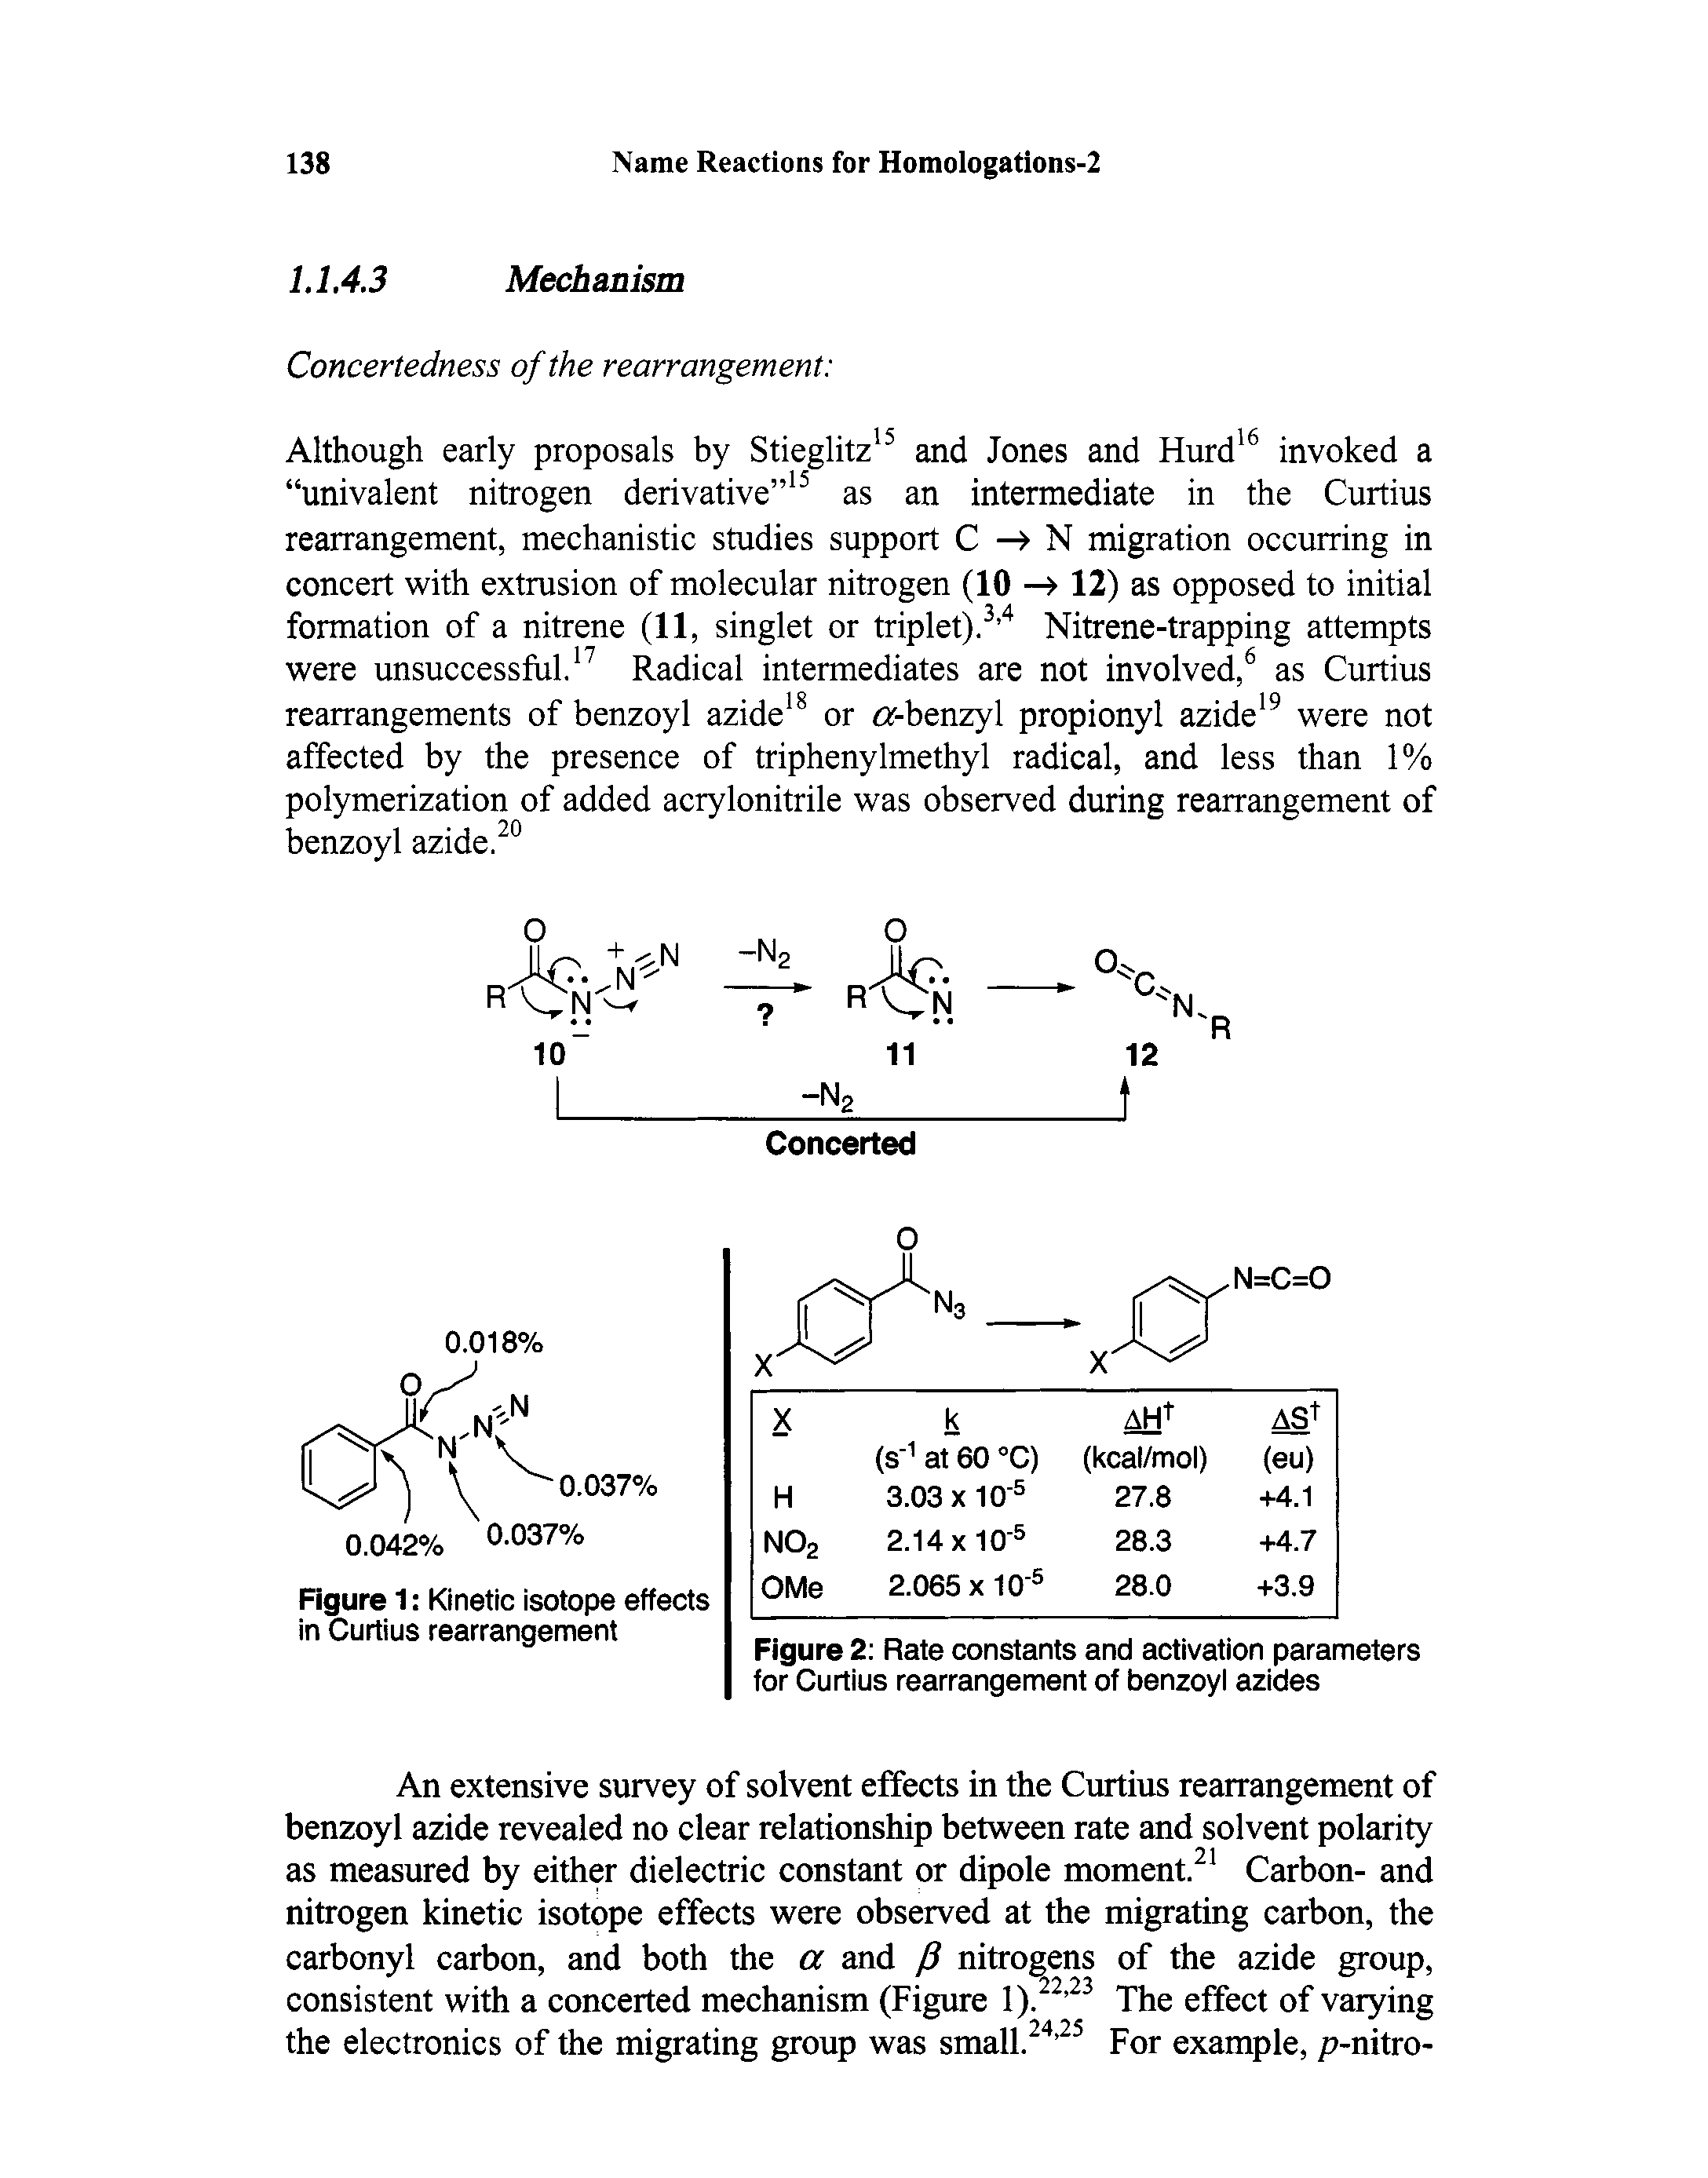 Figure 2 Rate constants and activation parameters for Curtius rearrangement of benzoyl azides...